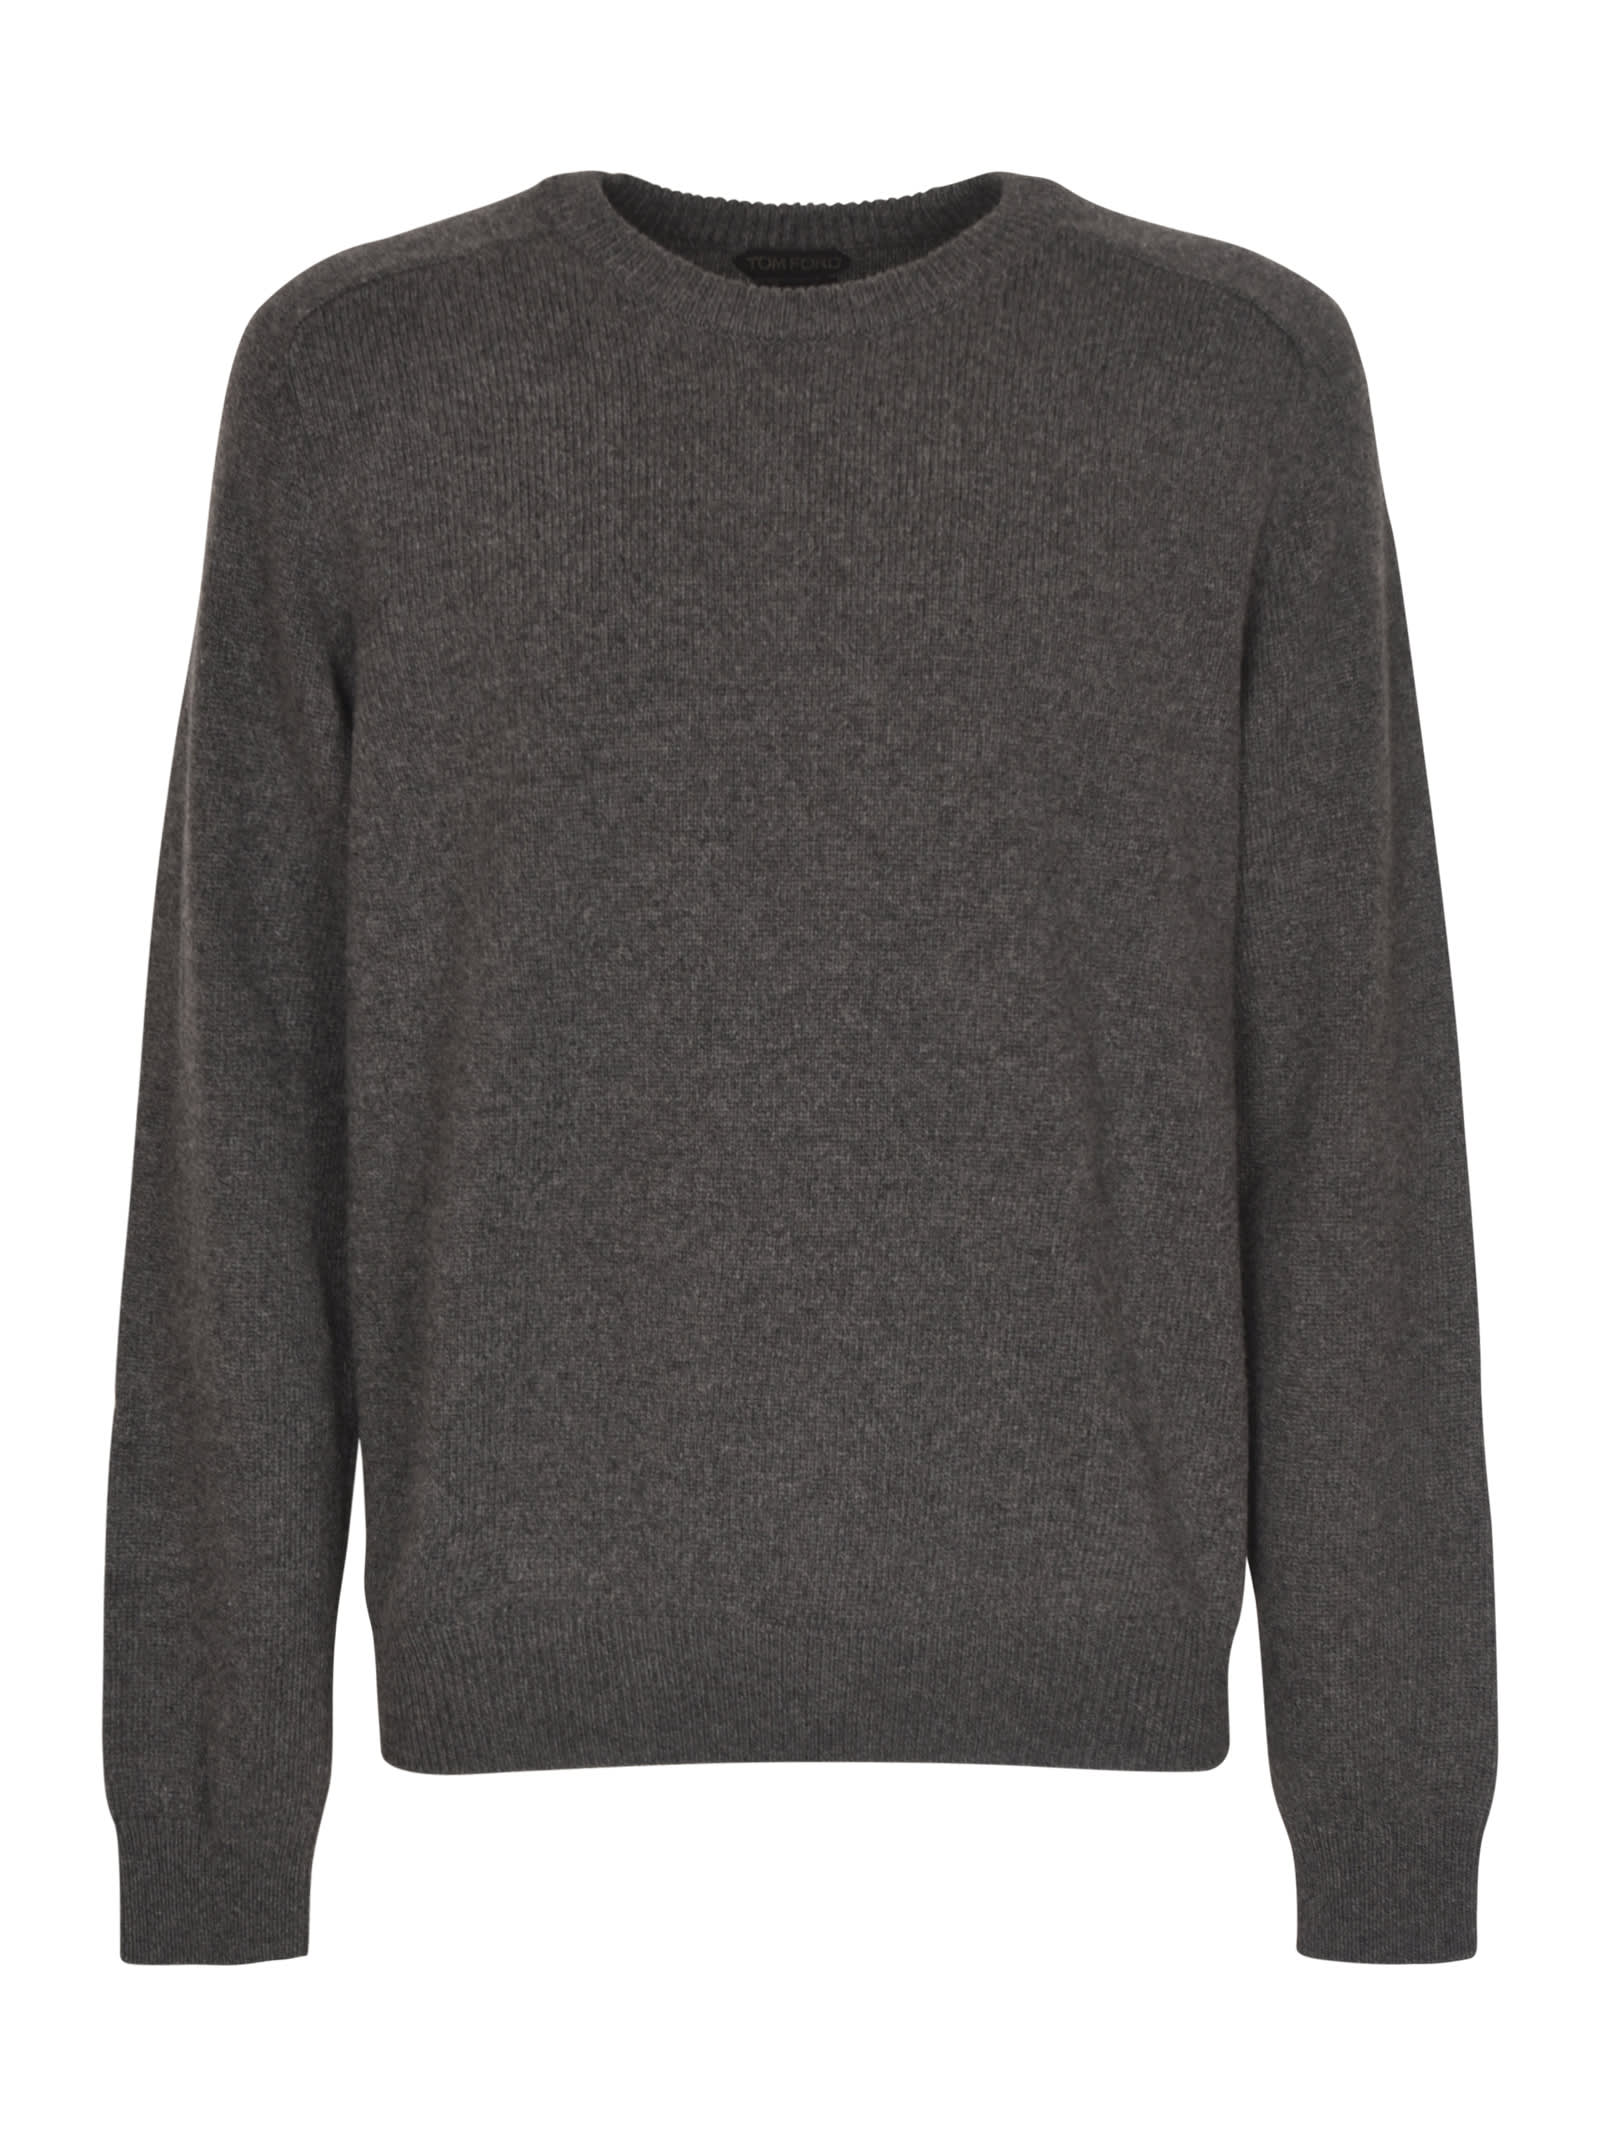 Tom Ford Round Neck Sweater